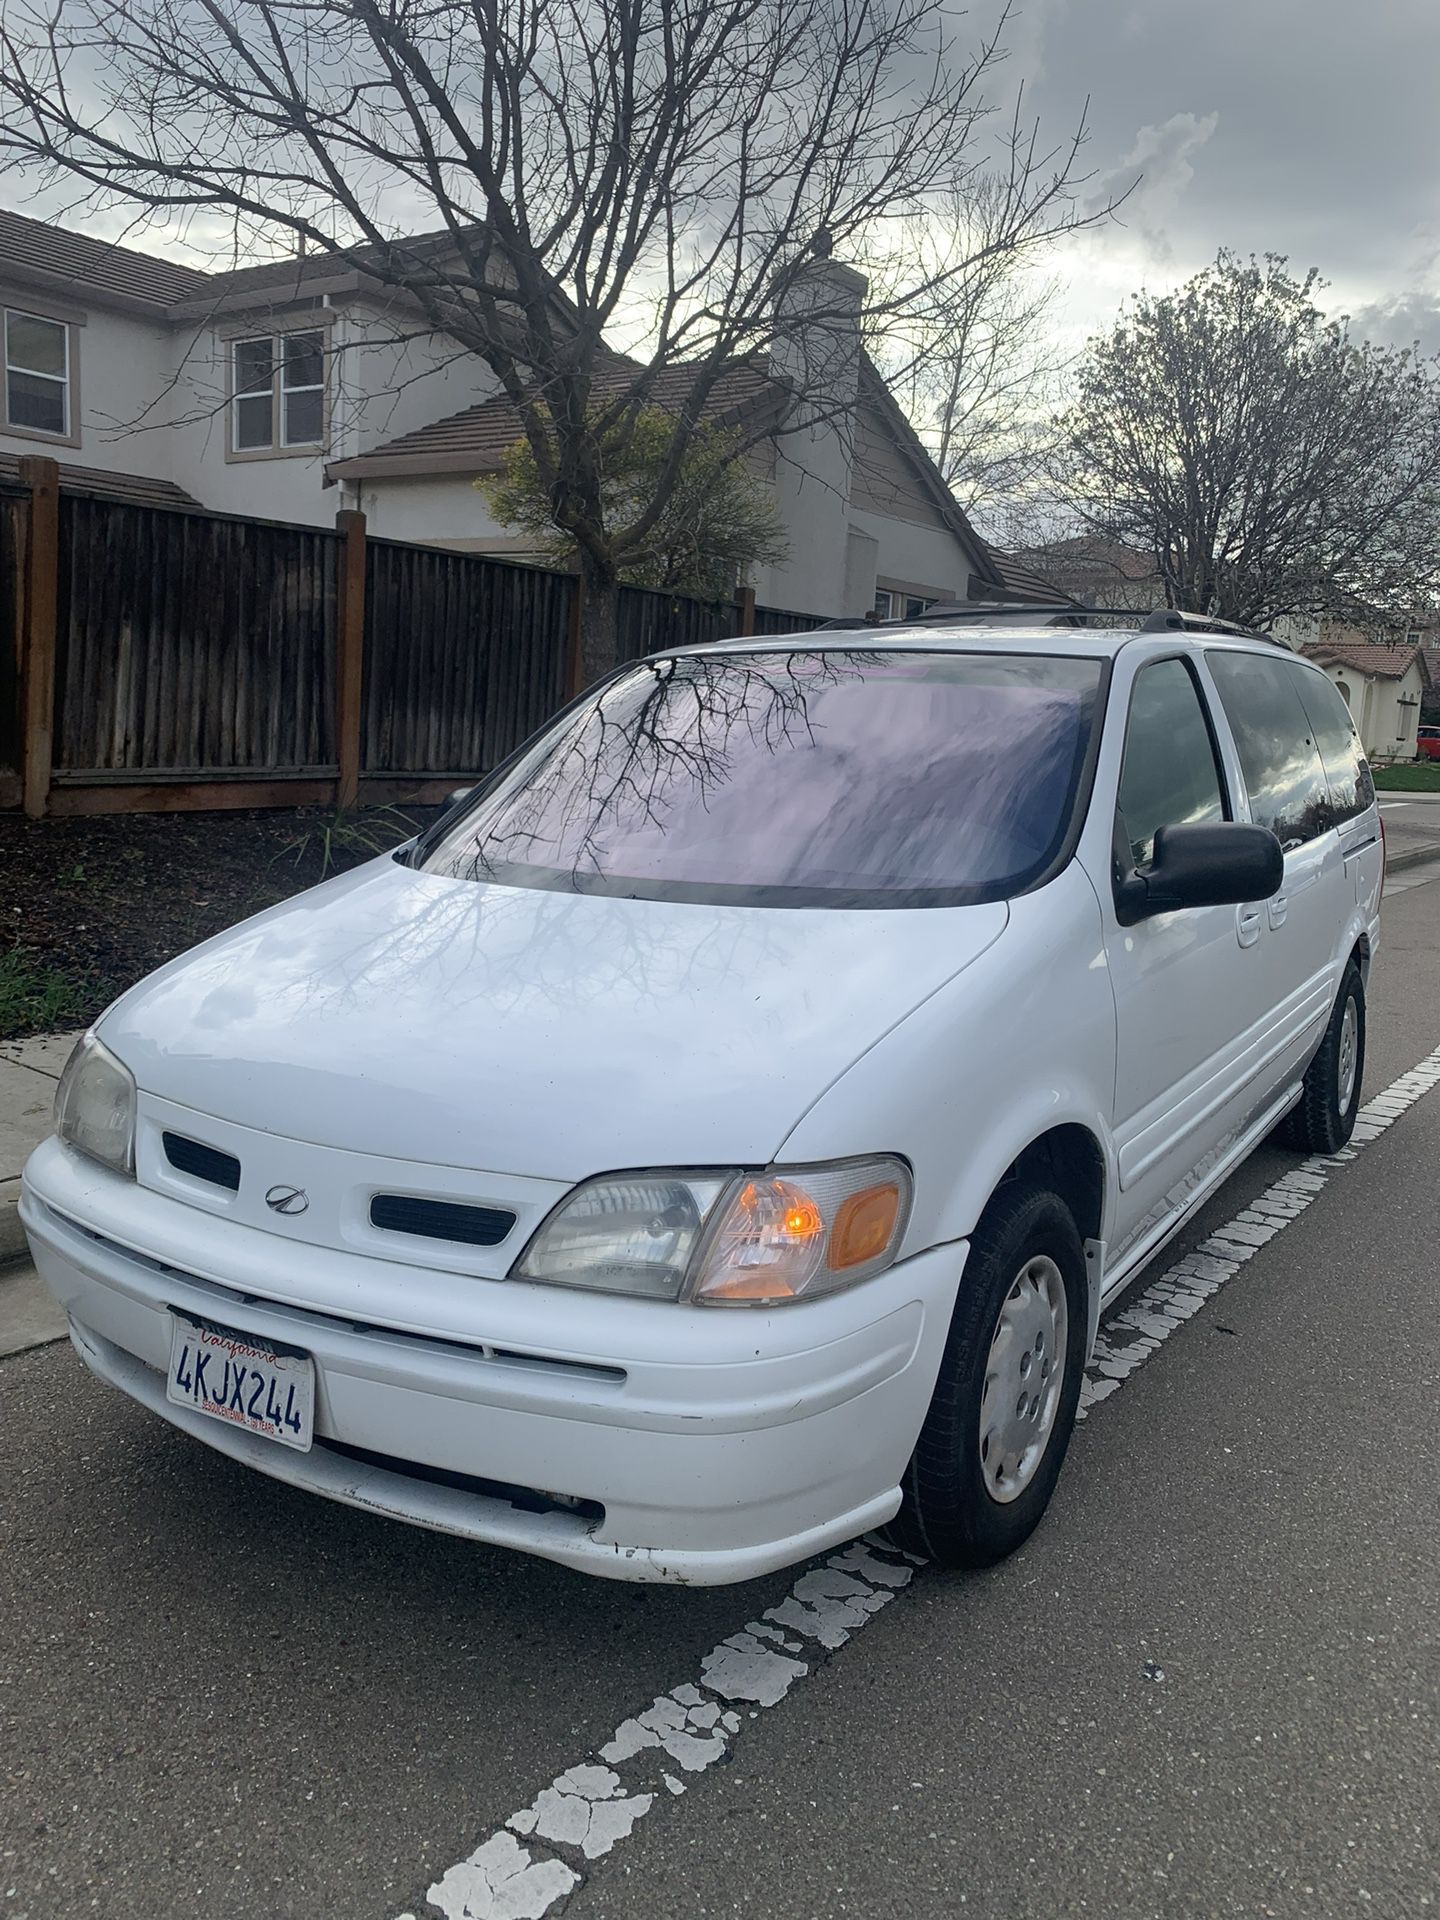 2000 Oldsmobile Silhouette for Sale in Tracy, CA - OfferUp